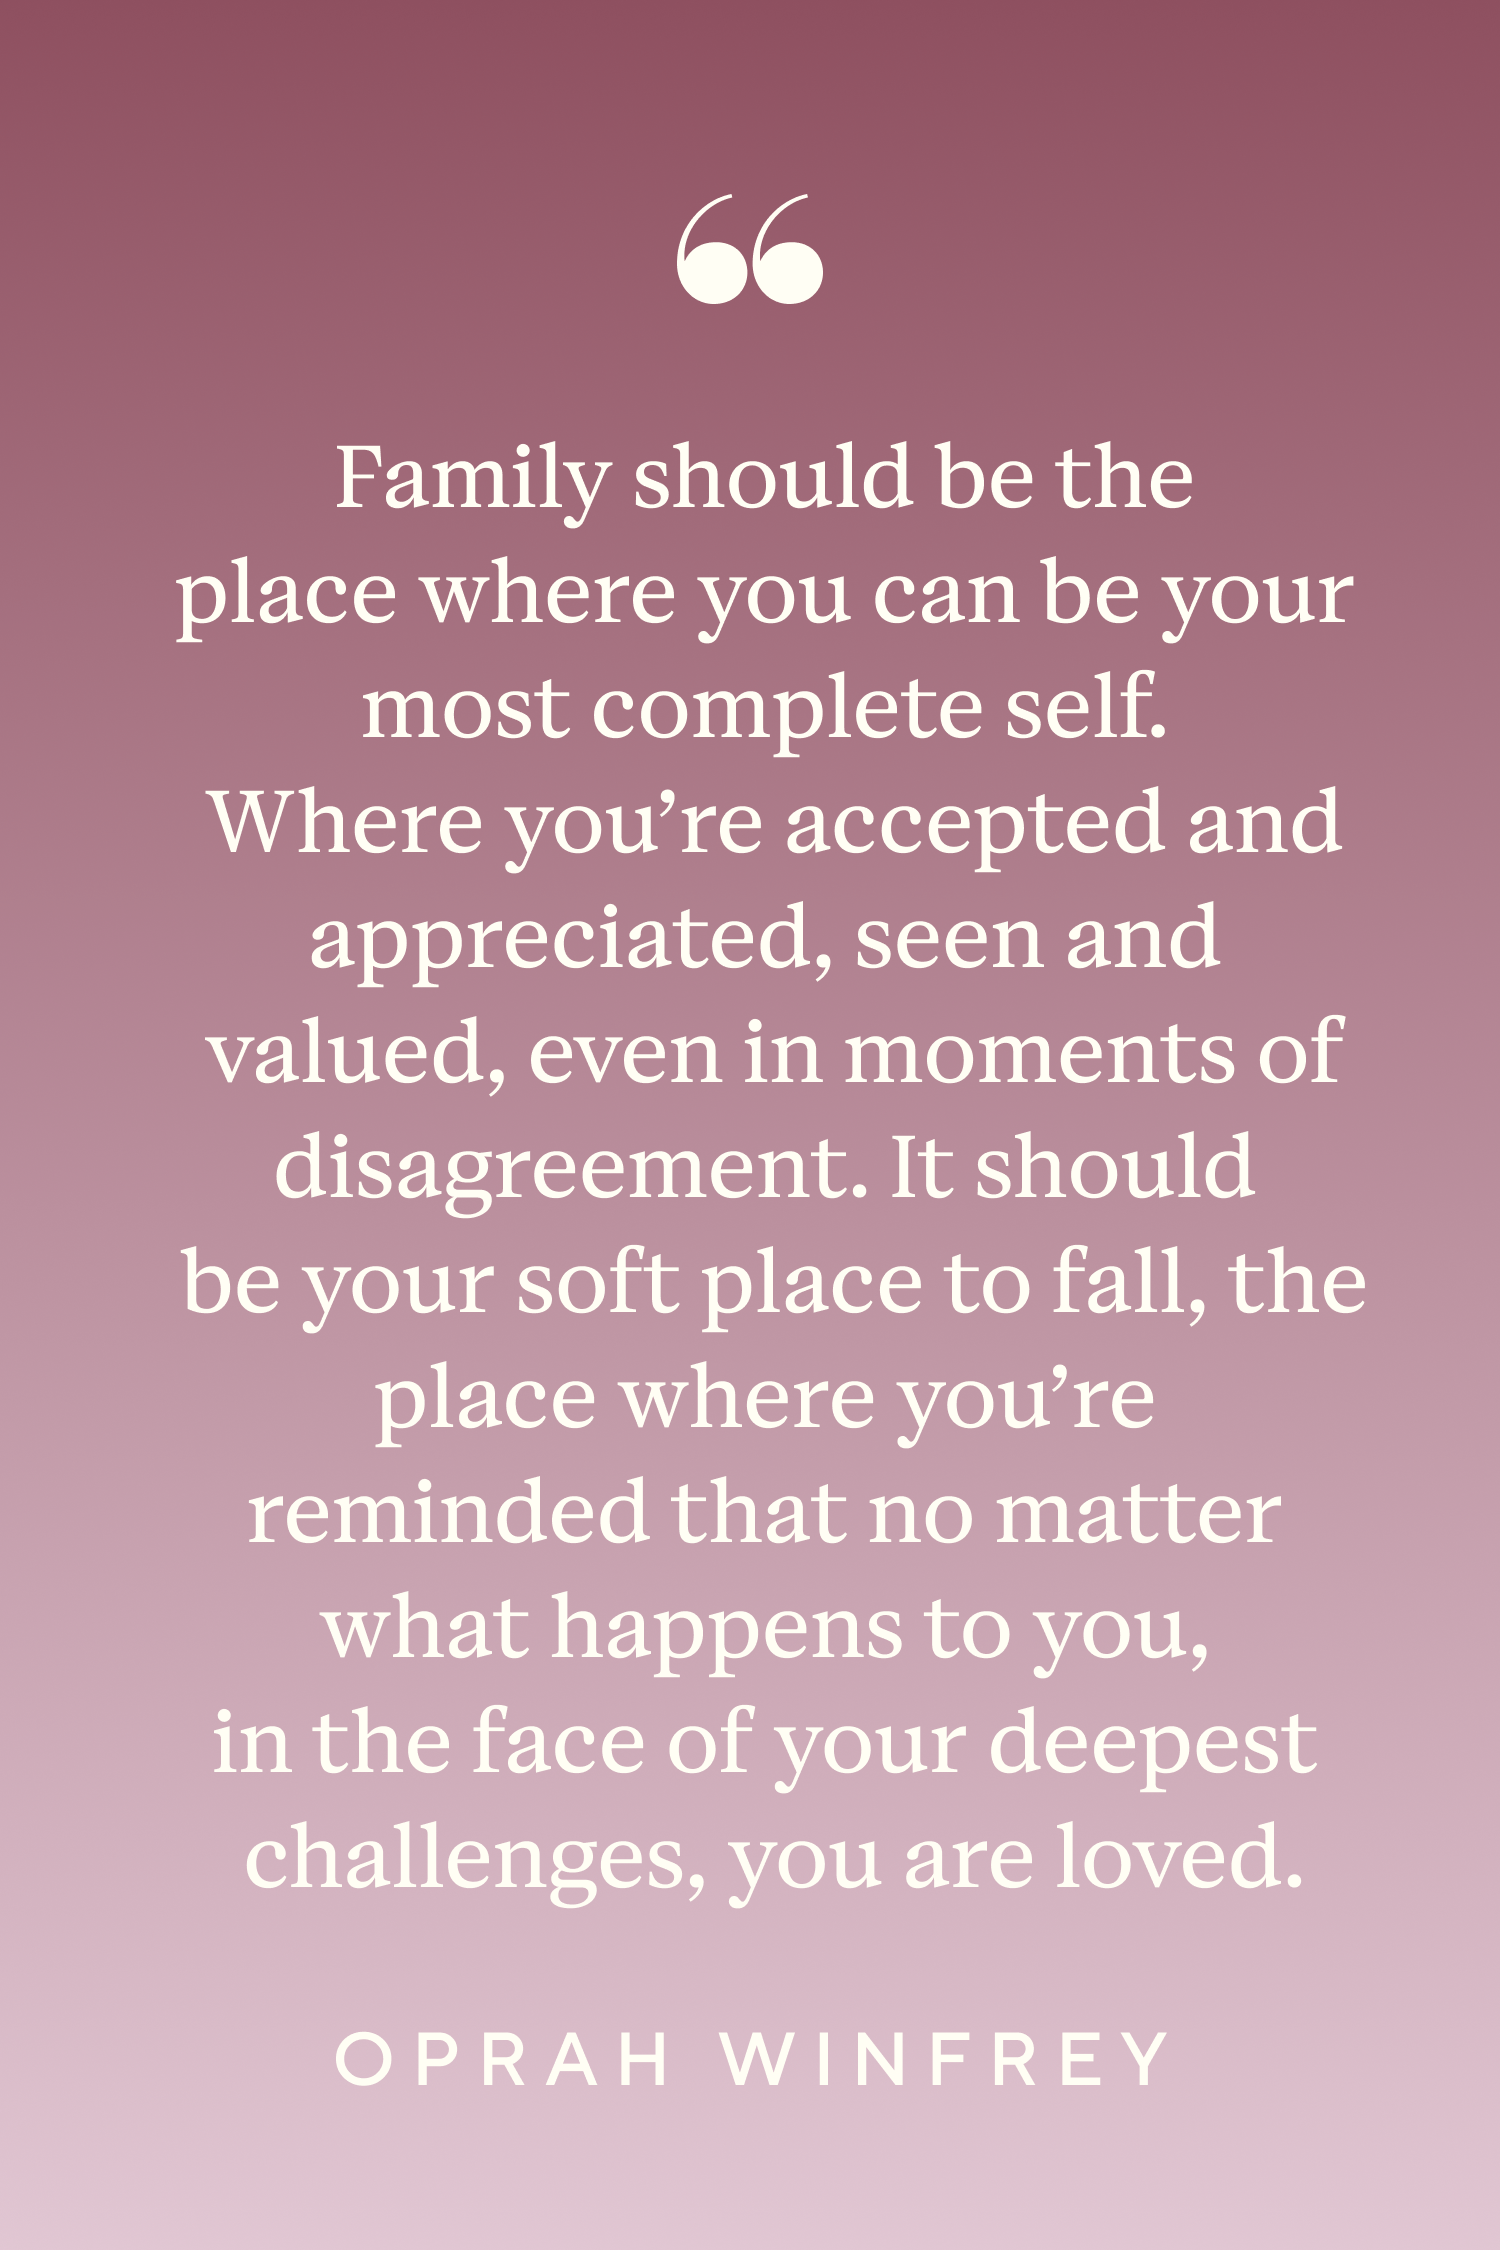 Family Images With Quotes